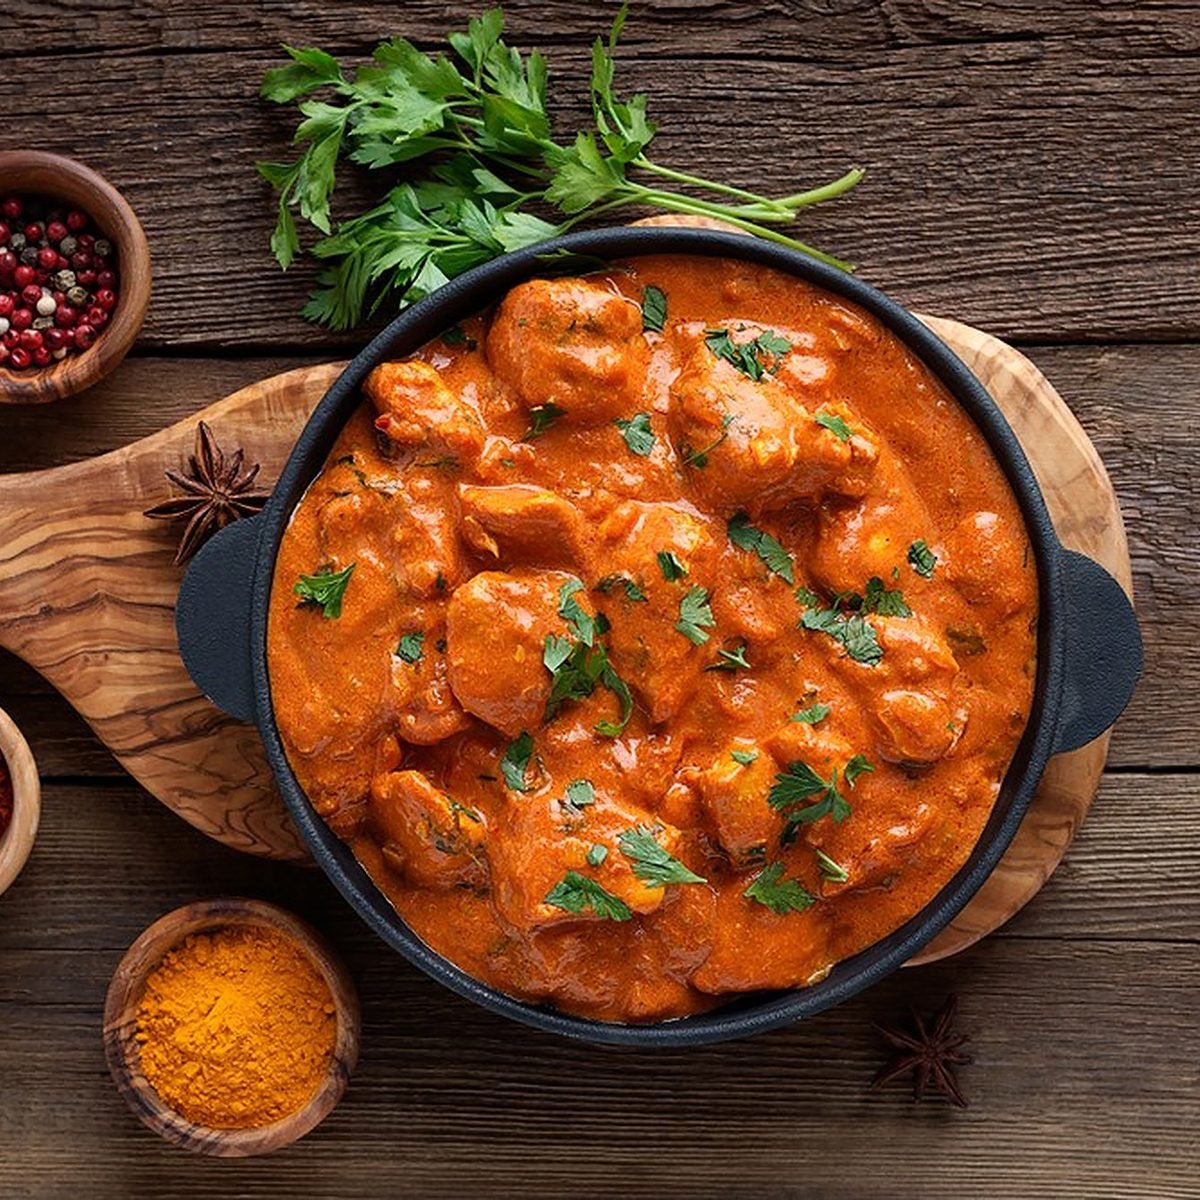 BLOG OF KNOWLEDGE: Indian food